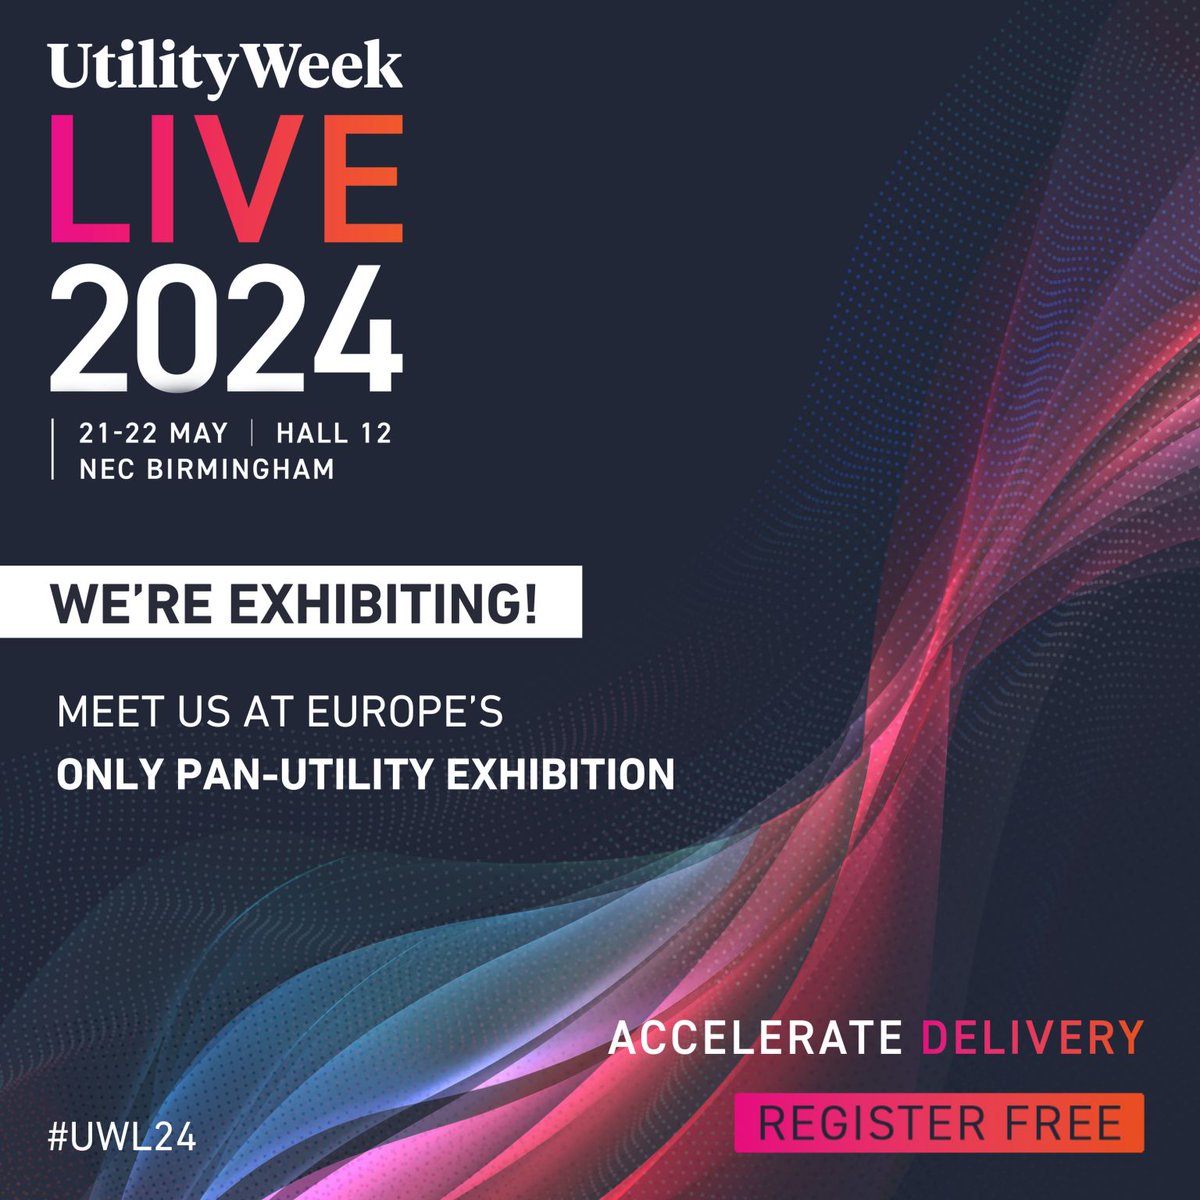 Are you heading to @UtilityWeekLive next week? Join OS on stand H16. Talk to our team about unlocking the power of location data: ow.ly/pTEC50RIfsq #UWL24